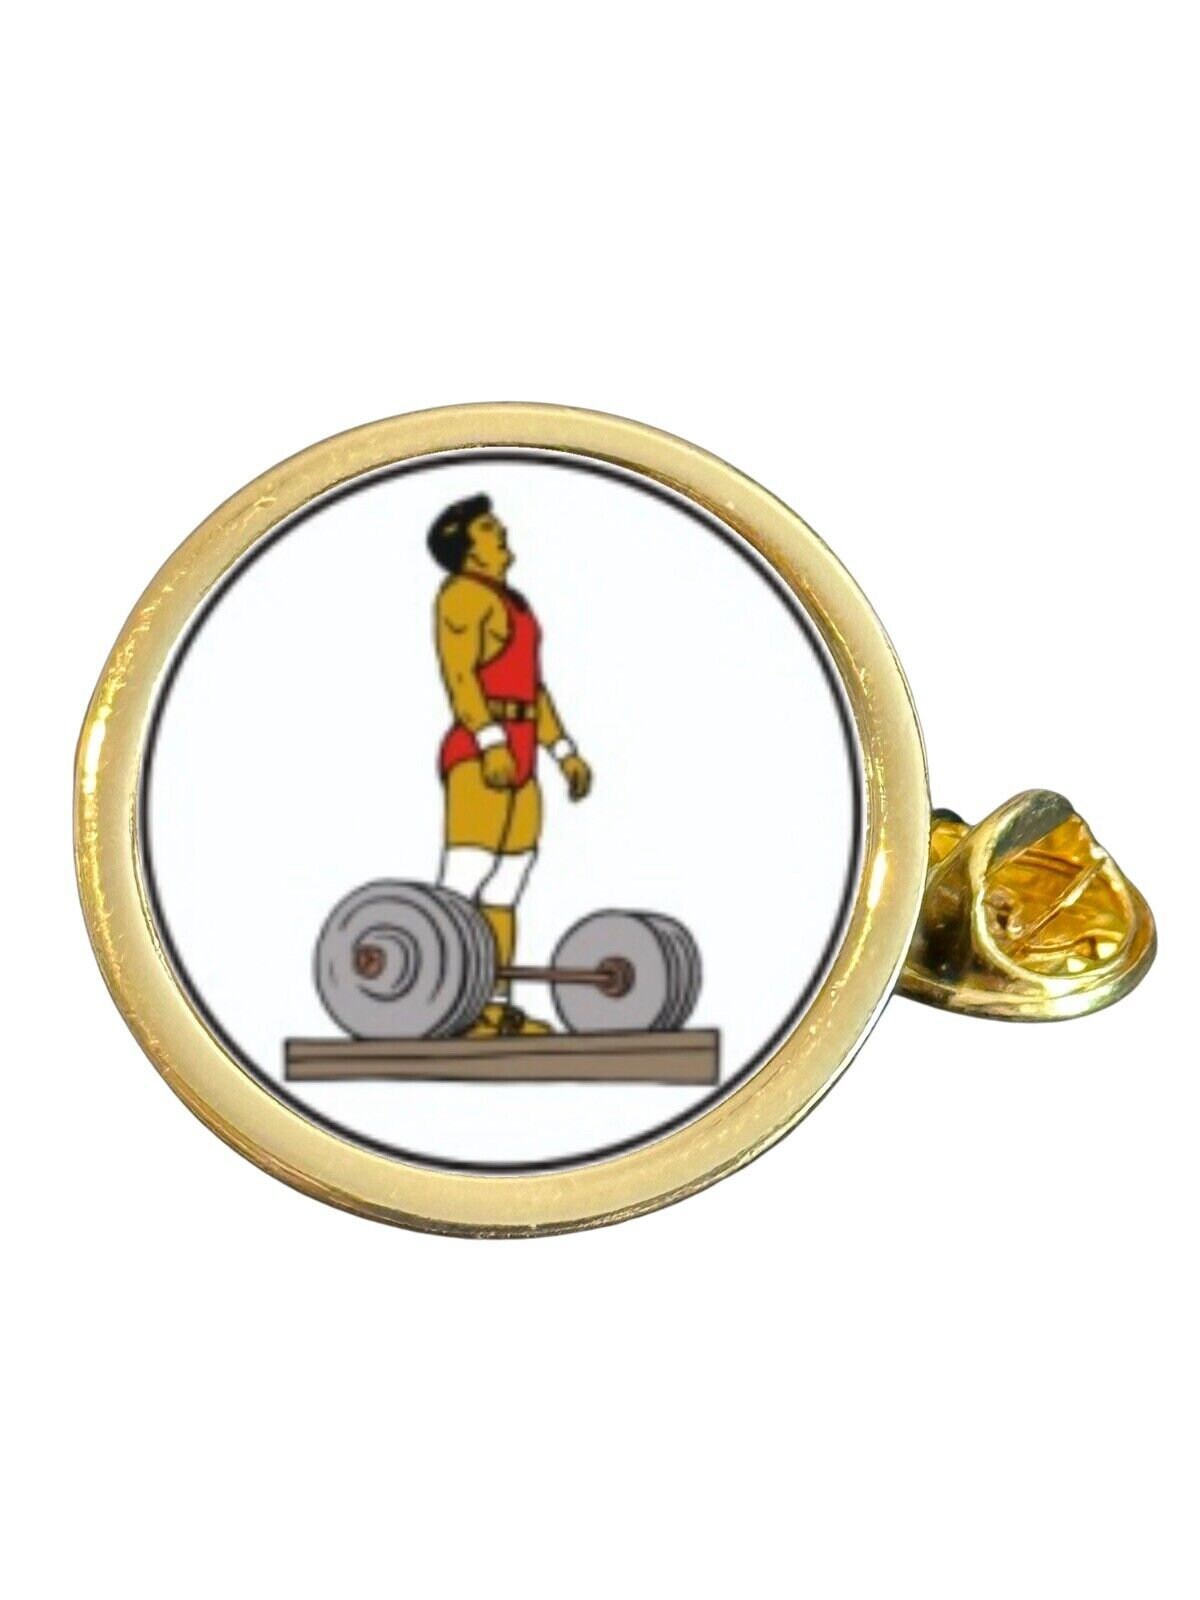 Lapel Pin GYM Weight Plate Lift Heavy 45lbs · Gym Pin · PINS · Enamel Pins  · Pins for backpacks · Coach Gif · Pin Bag·Button pins ·Wod & Fit